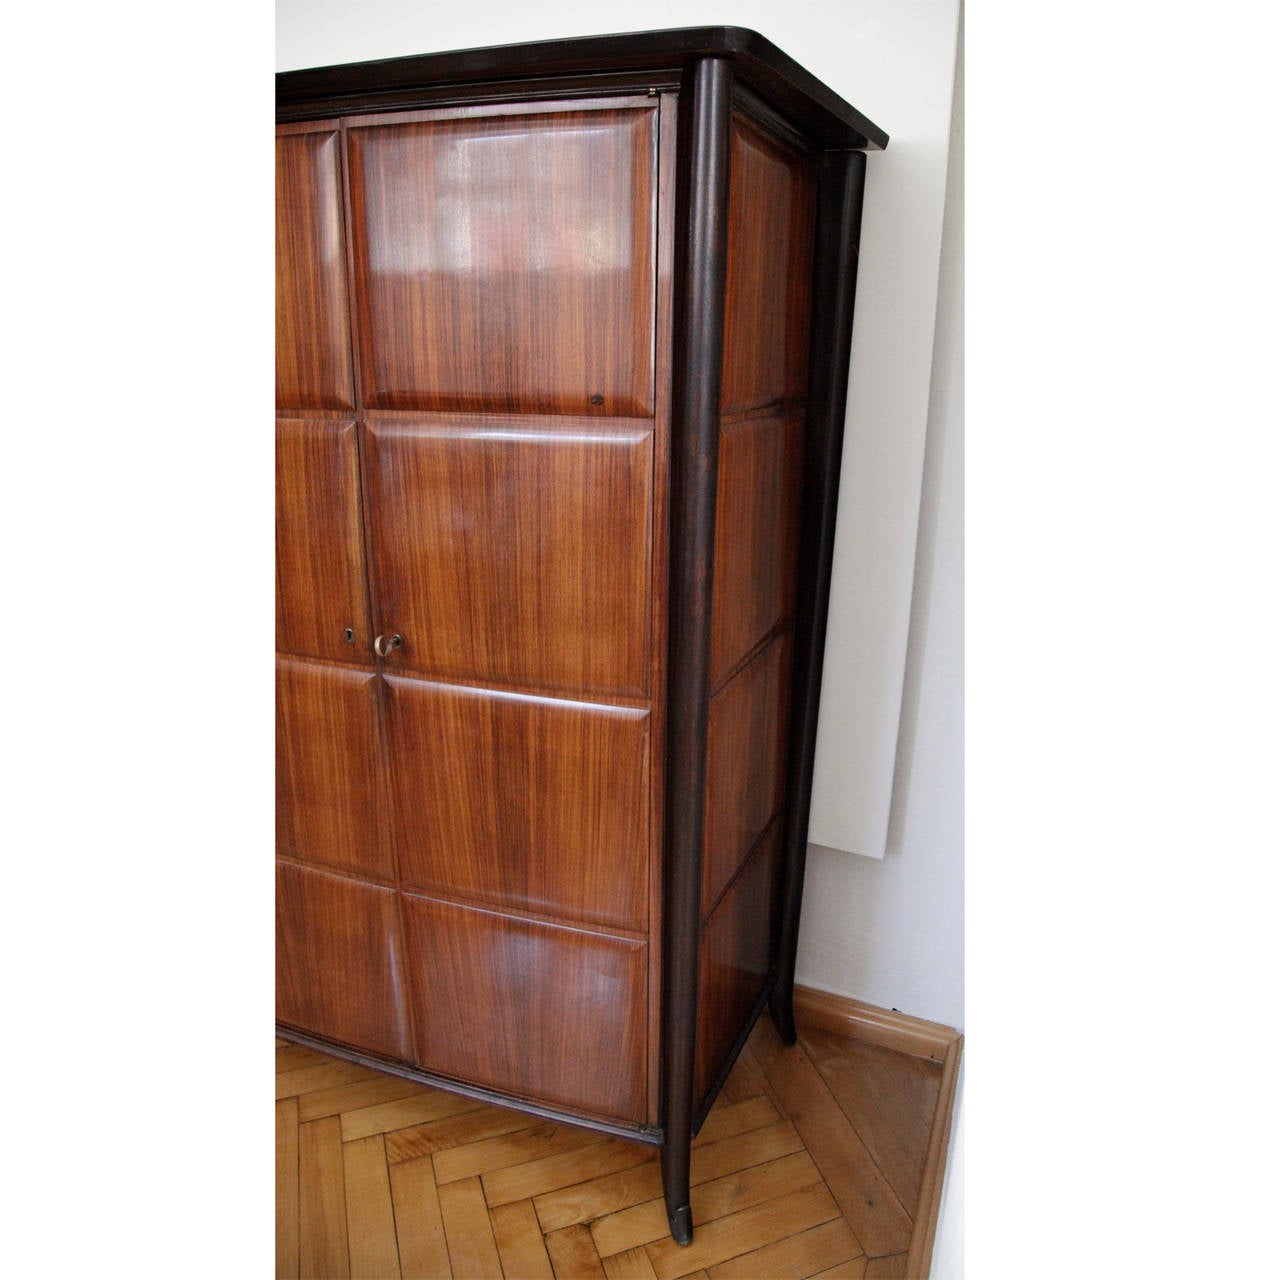 Wonderful Italian Cabinet / Highboard, attributed to Osvaldo Borsani, 1950s.

Great trapezoidal closet with three compartments. On the left and right side is a great compartment with a hanging rail, the middle section has two additional drawers.